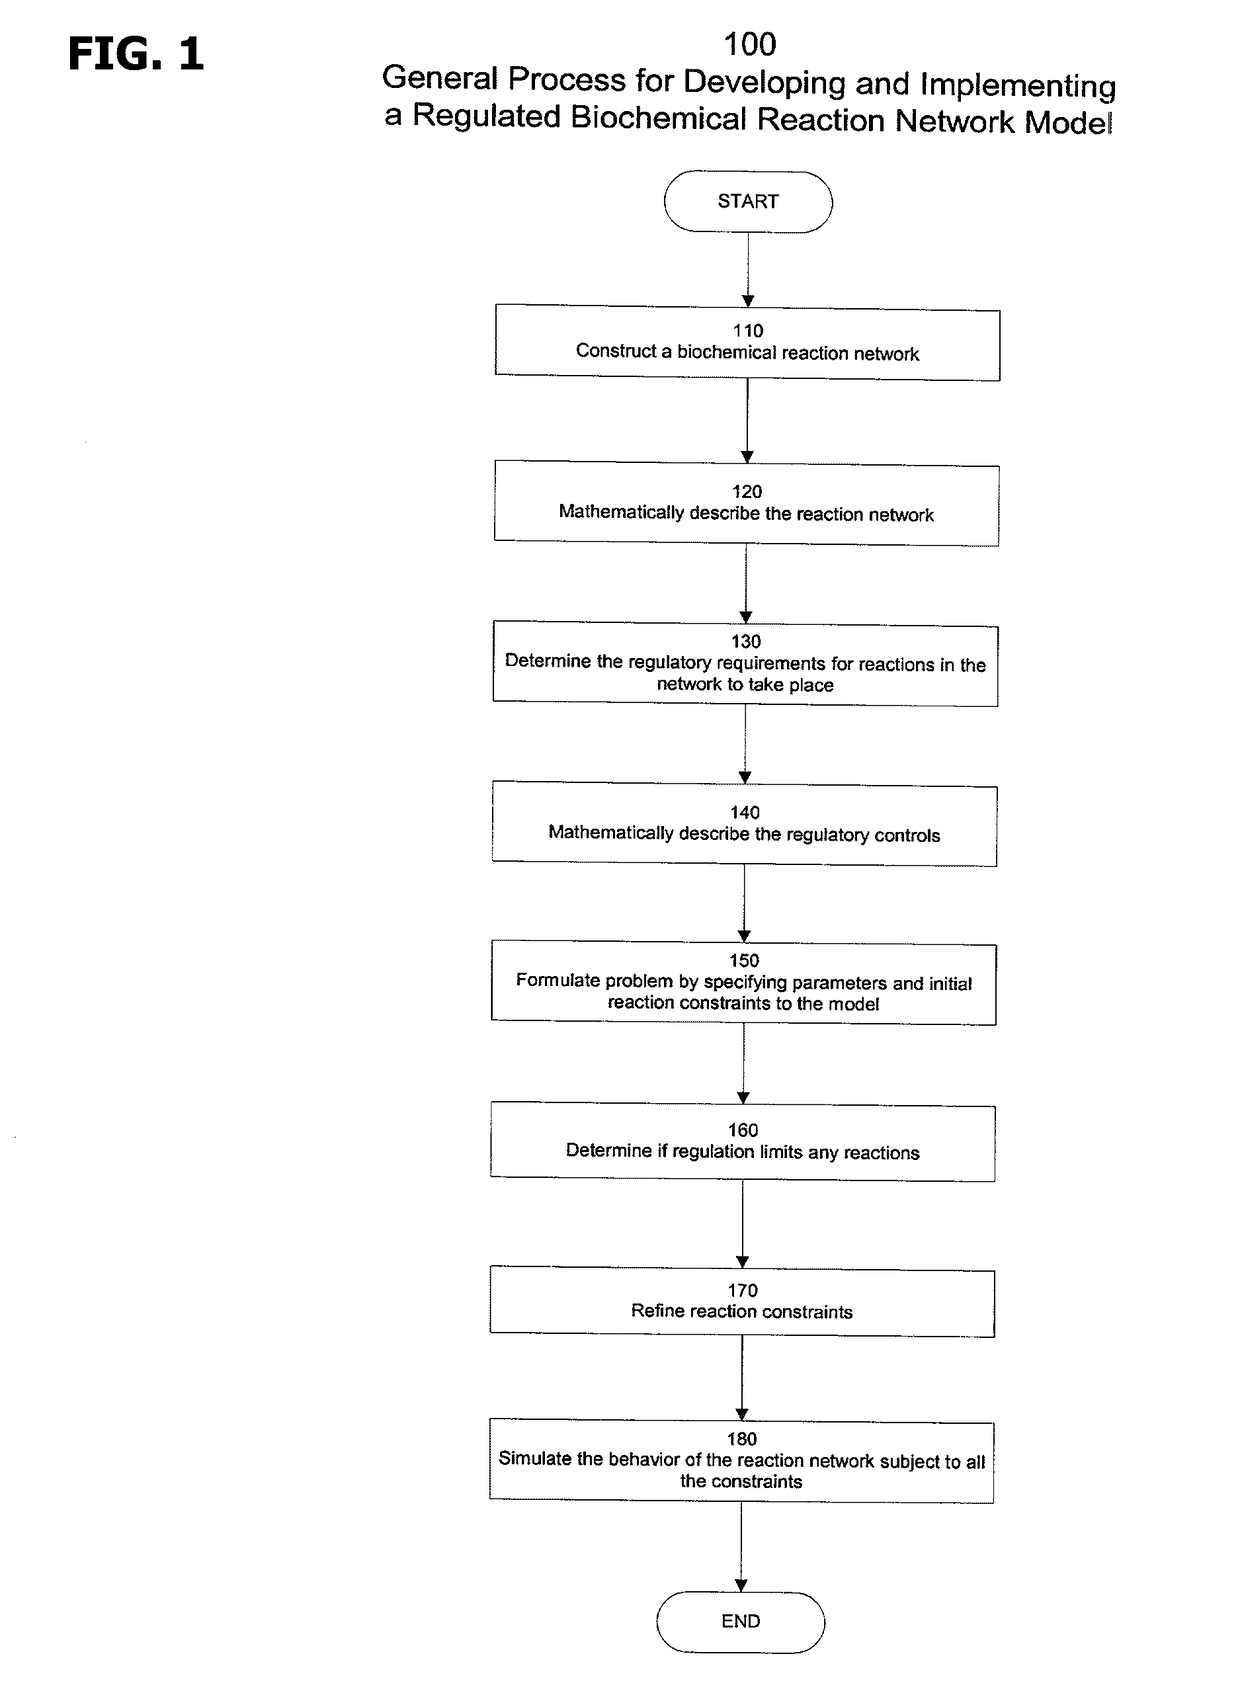 Models and methods for determining systemic properties of regulated reaction networks